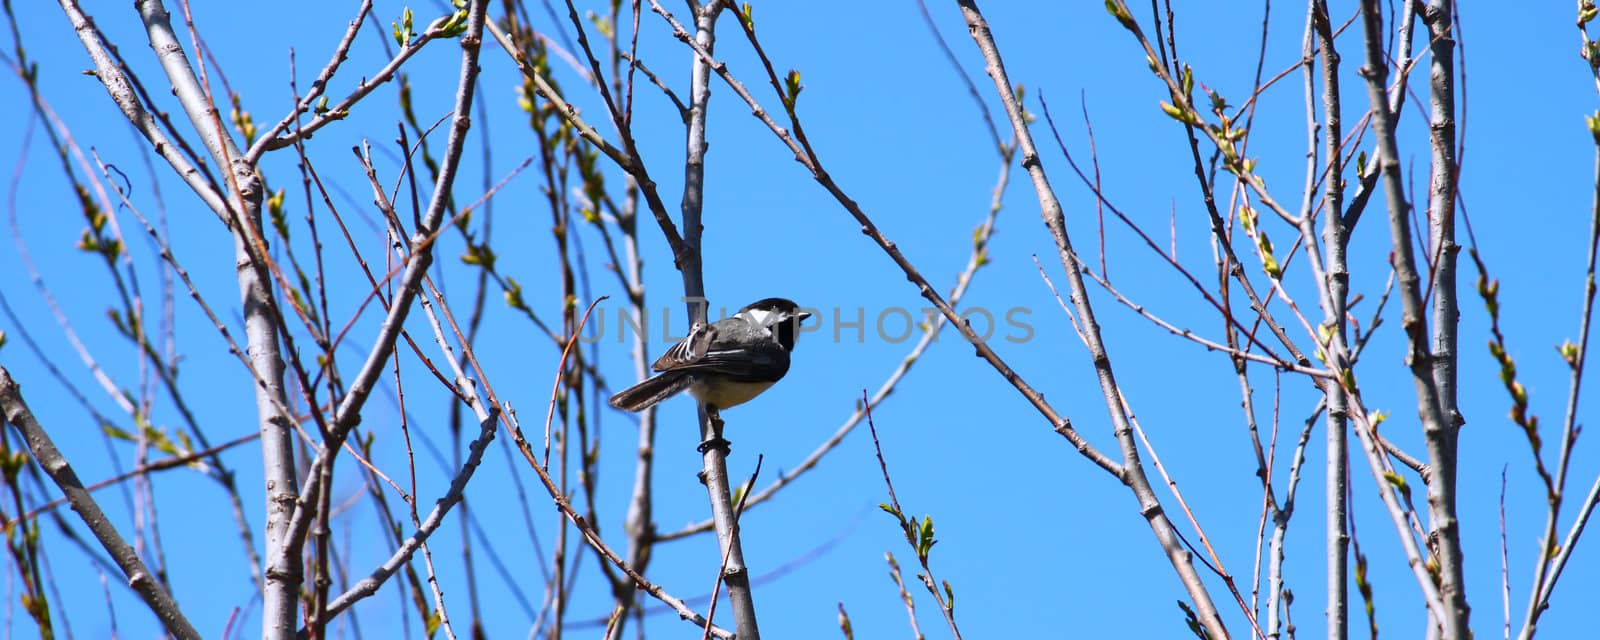 Black-capped Chickadee (Poecile atricapillus) perched in a thicket of willows.